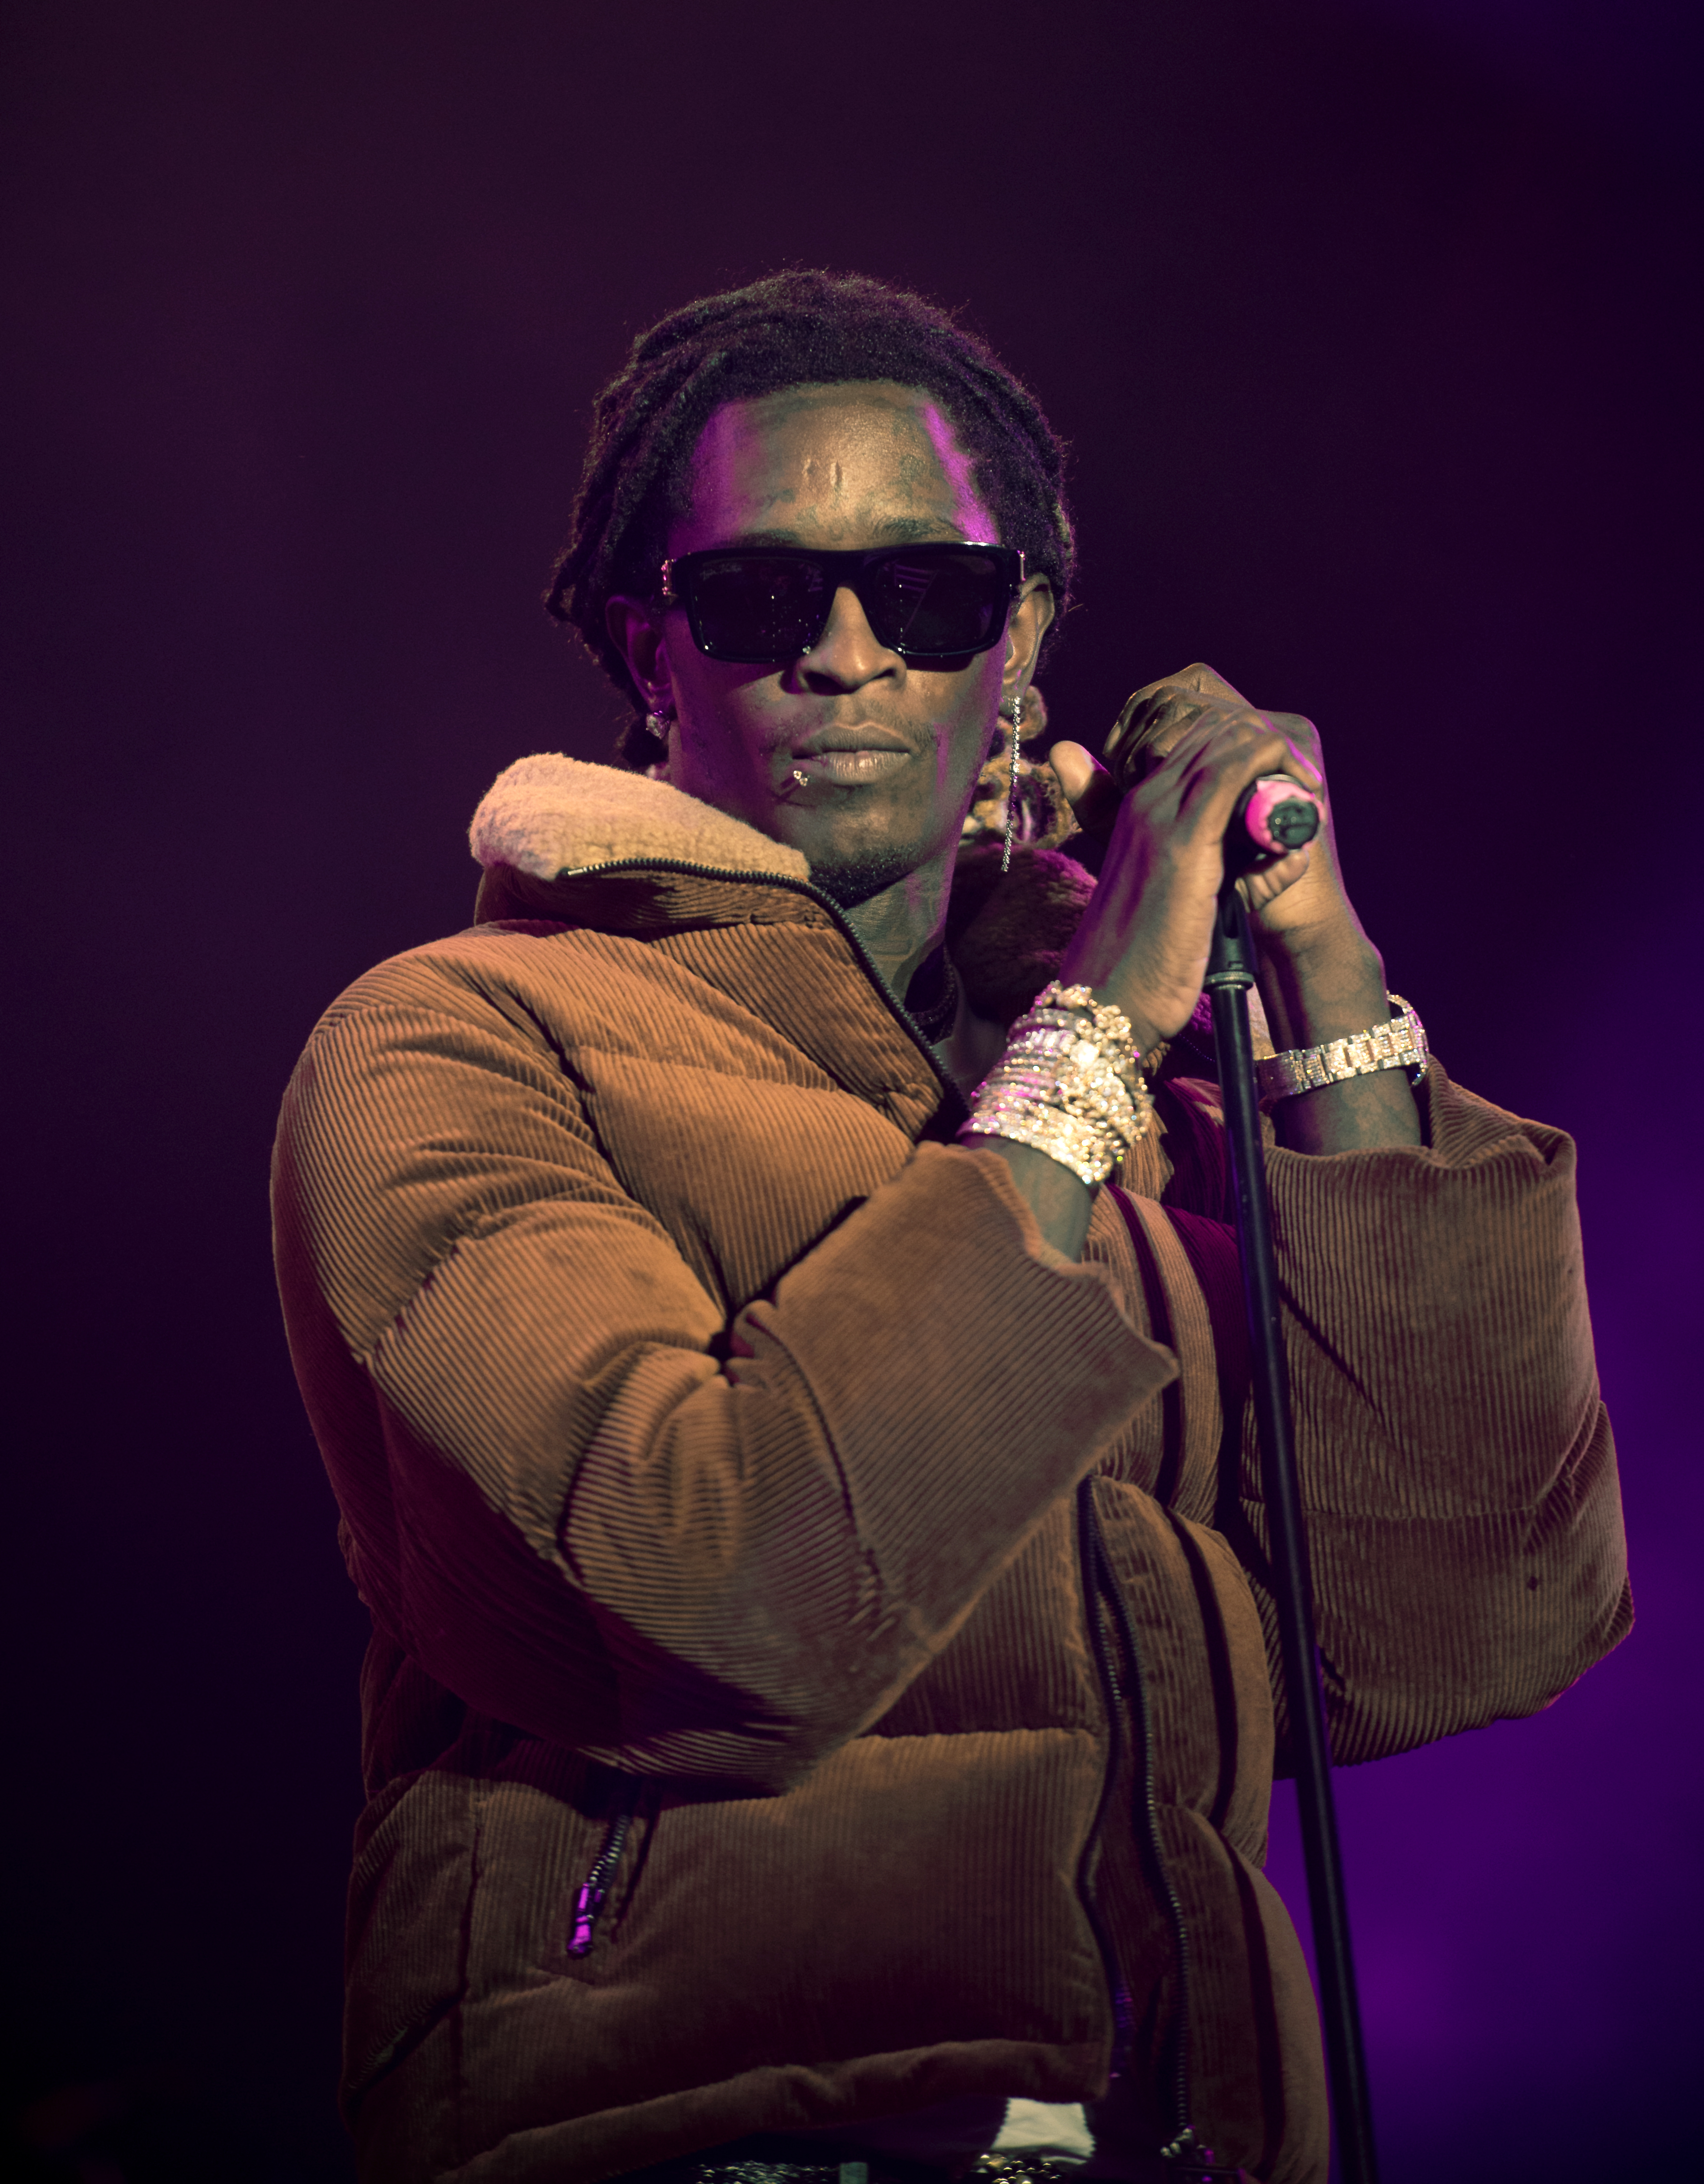 daniel arnette add is young thug bisexual photo